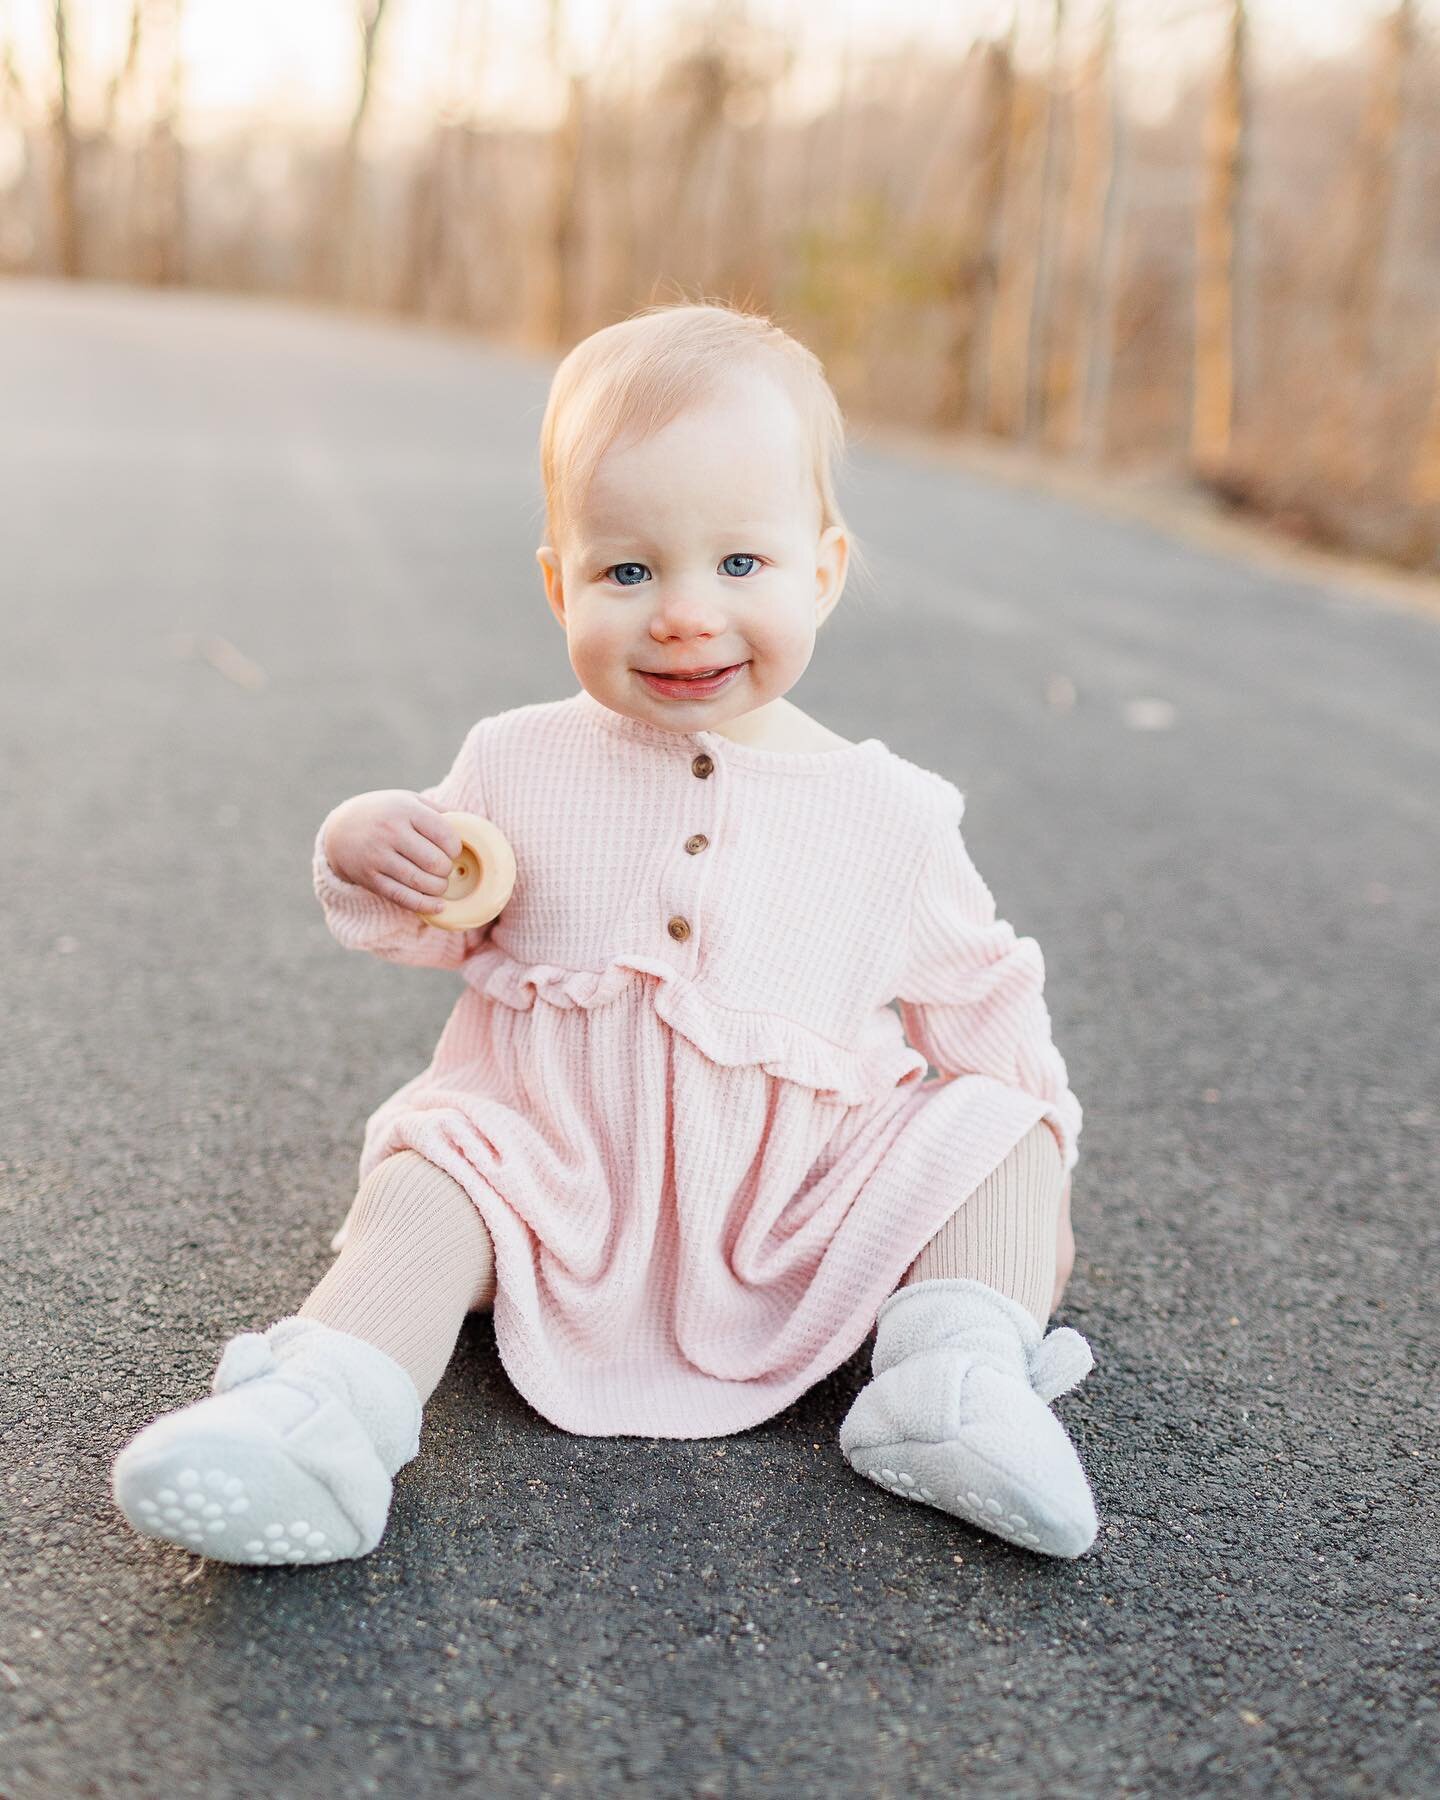 A one year old nugget of joy, even on a chilly winter day. 🎂🌸🎀
.
.
.
.
#lifestylephotographer #ellicottcityphotographer #ellicottcityportraitphotographer #howardcountychildphotographer #exploreellicottcity #maplelawnphotographer #annapolisphotogra